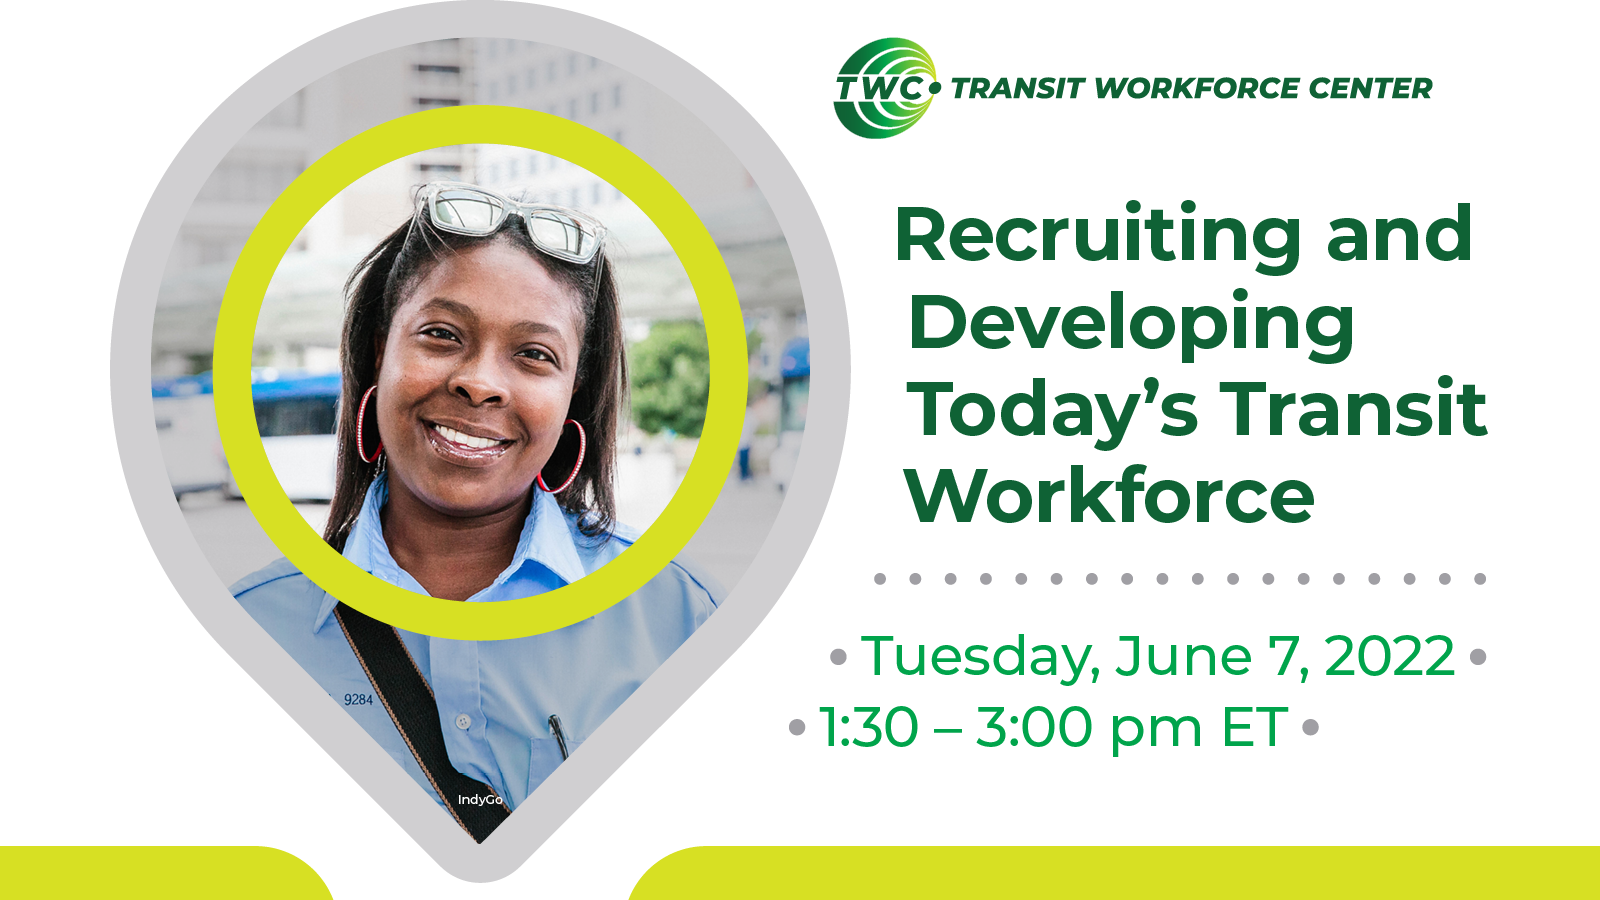 VIDEO: Recruiting and Developing Today’s Transit Workforce